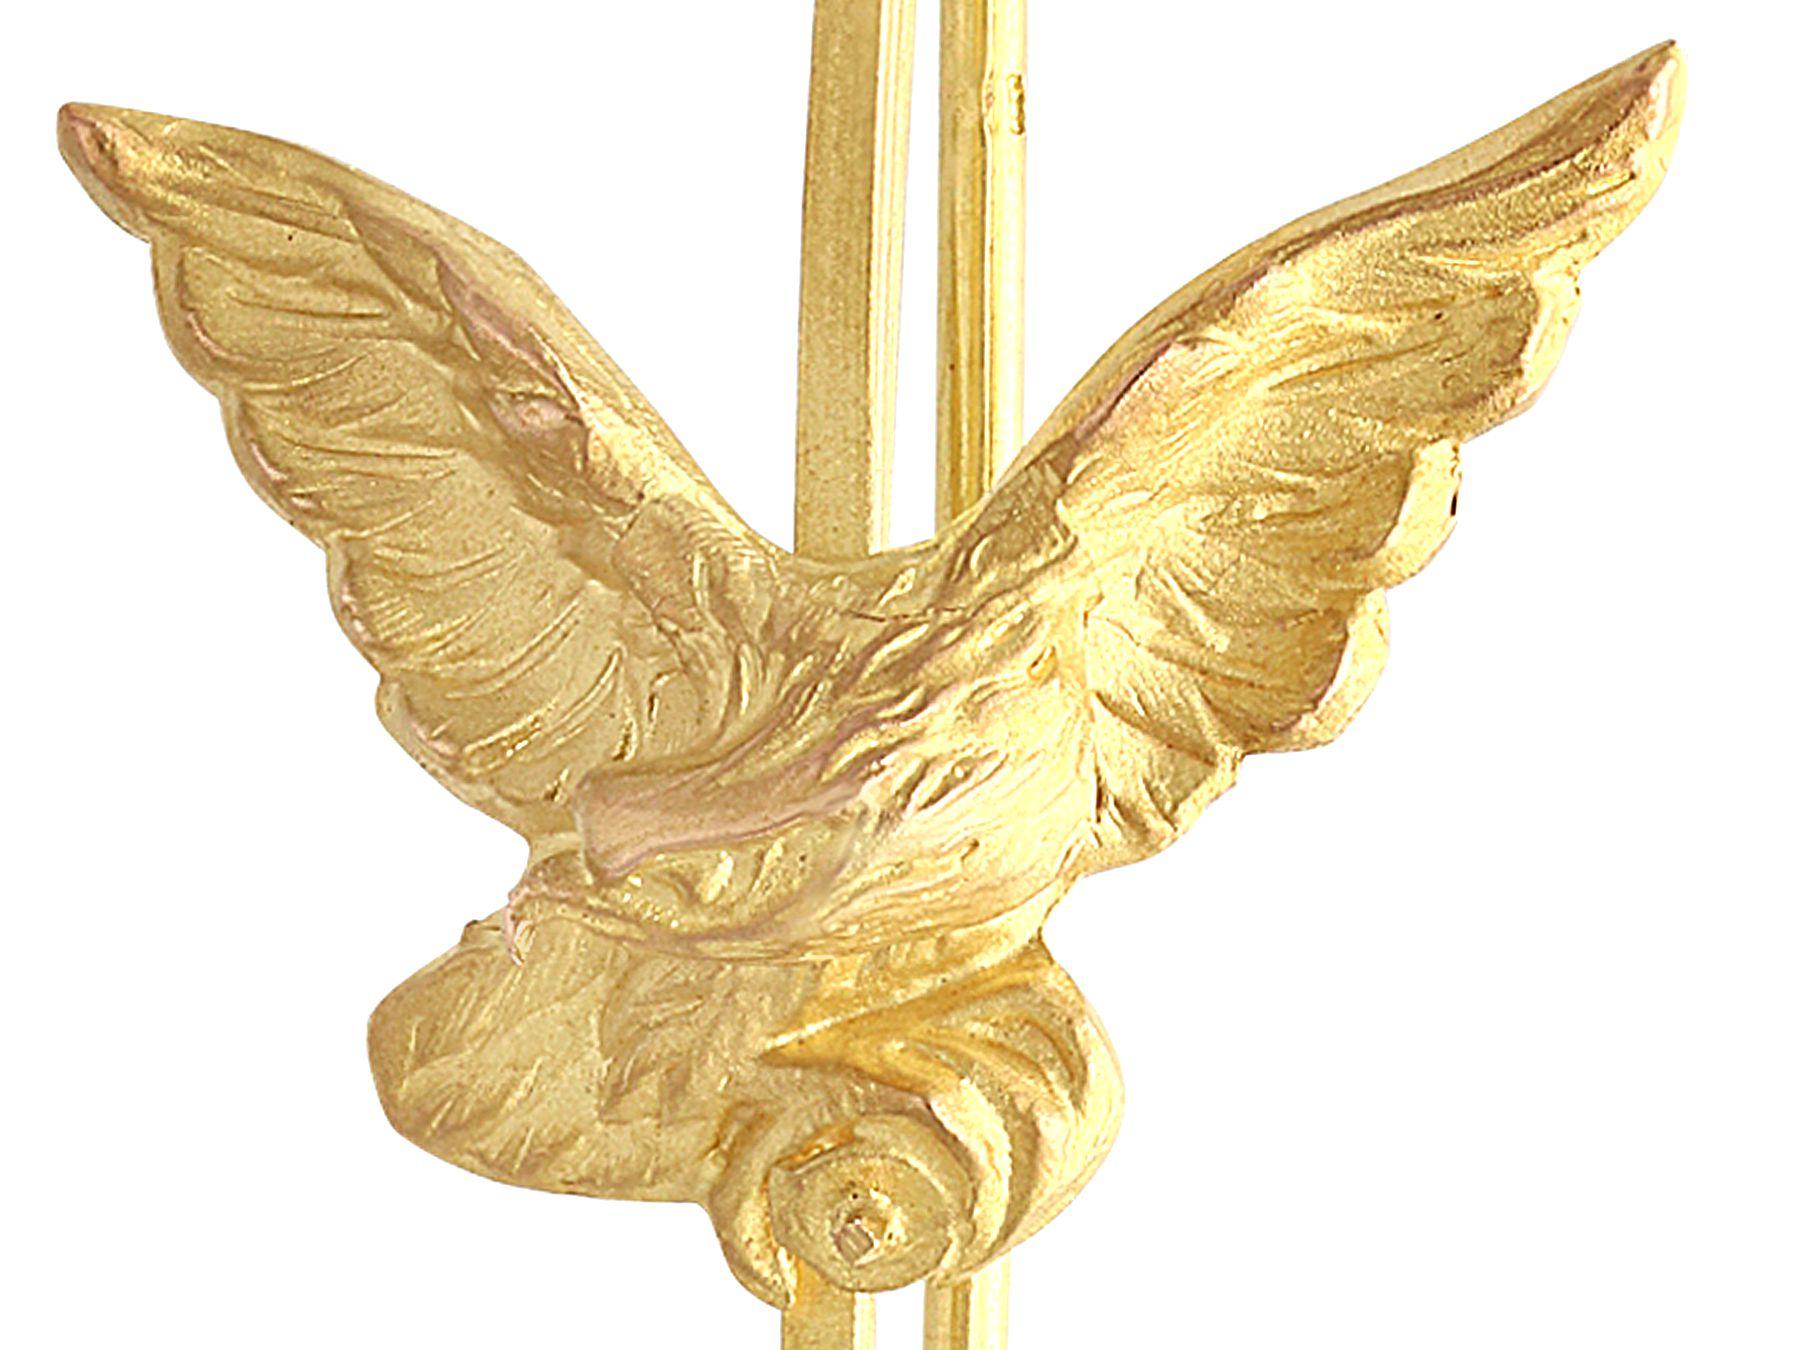 A fine and impressive 18 karat yellow gold pin brooch in the form of an eagle; part of our diverse antique estate jewelry collections.

This fine and impressive antique pin brooch has been crafted in 18k yellow gold, realistically modelled in the